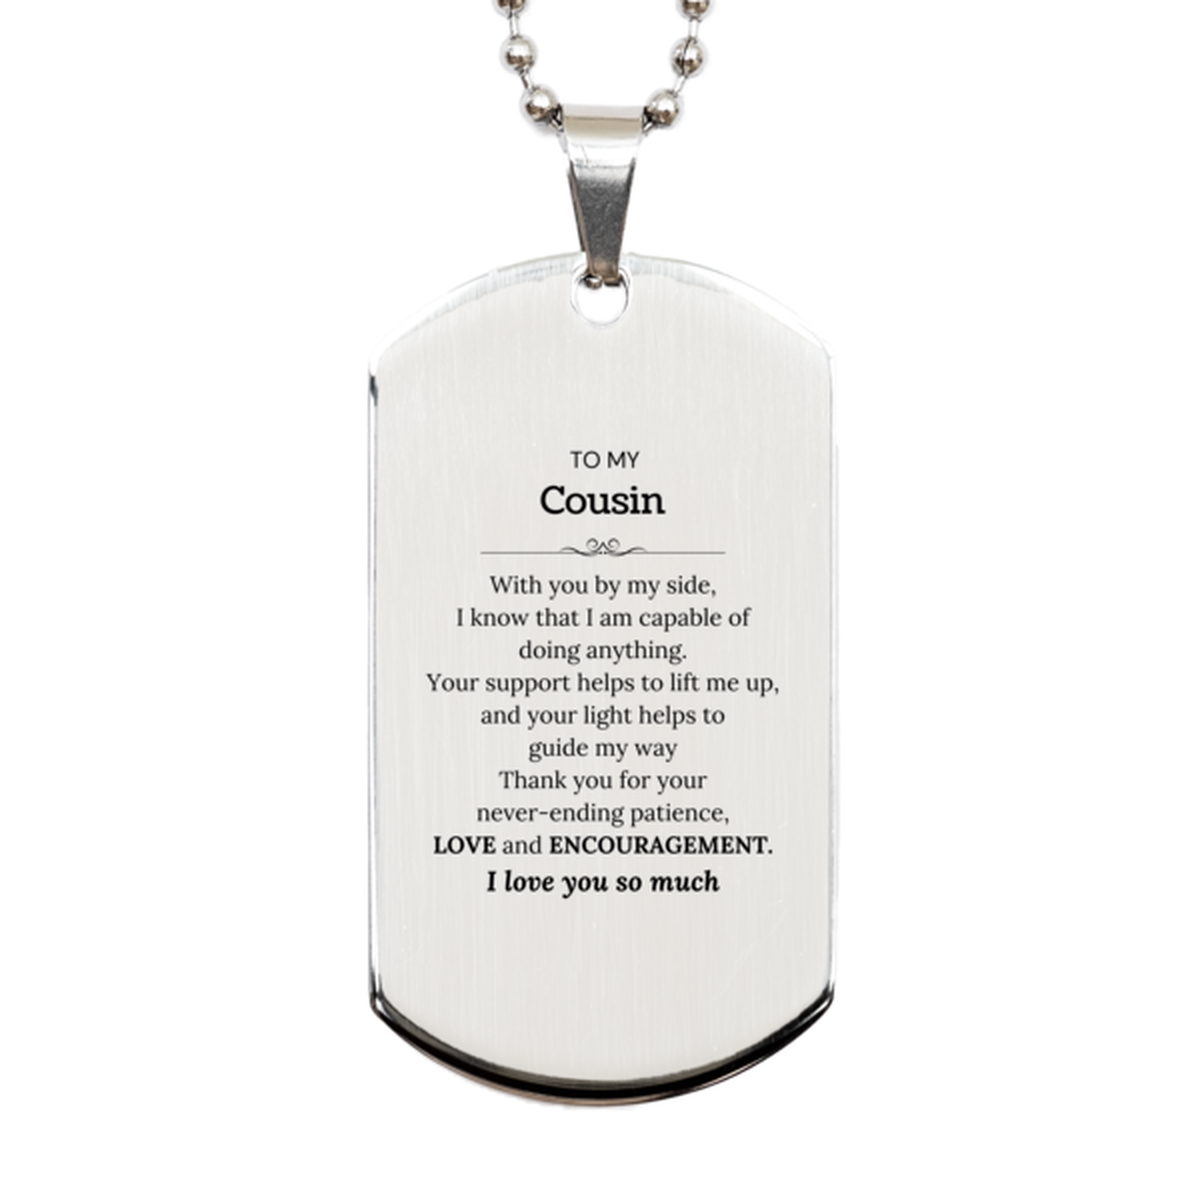 Appreciation Cousin Silver Dog Tag Gifts, To My Cousin Birthday Christmas Wedding Keepsake Gifts for Cousin With you by my side, I know that I am capable of doing anything. I love you so much